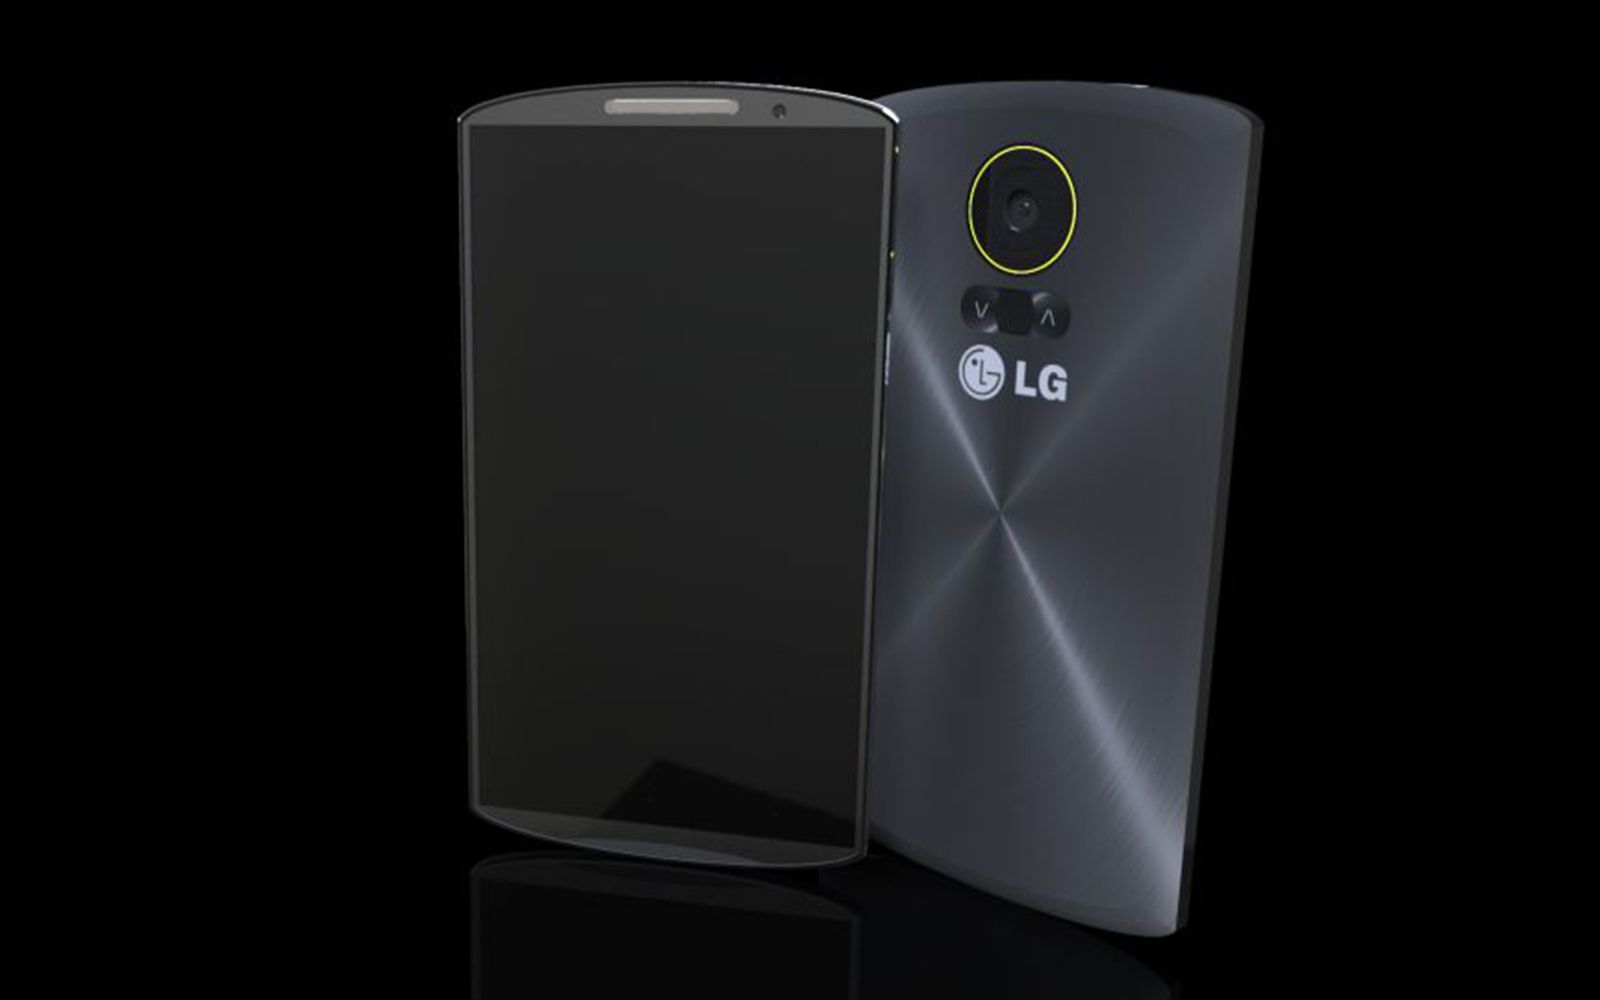 lg g4 leak suggests it will be packing a 3k display at 600ppi image 1